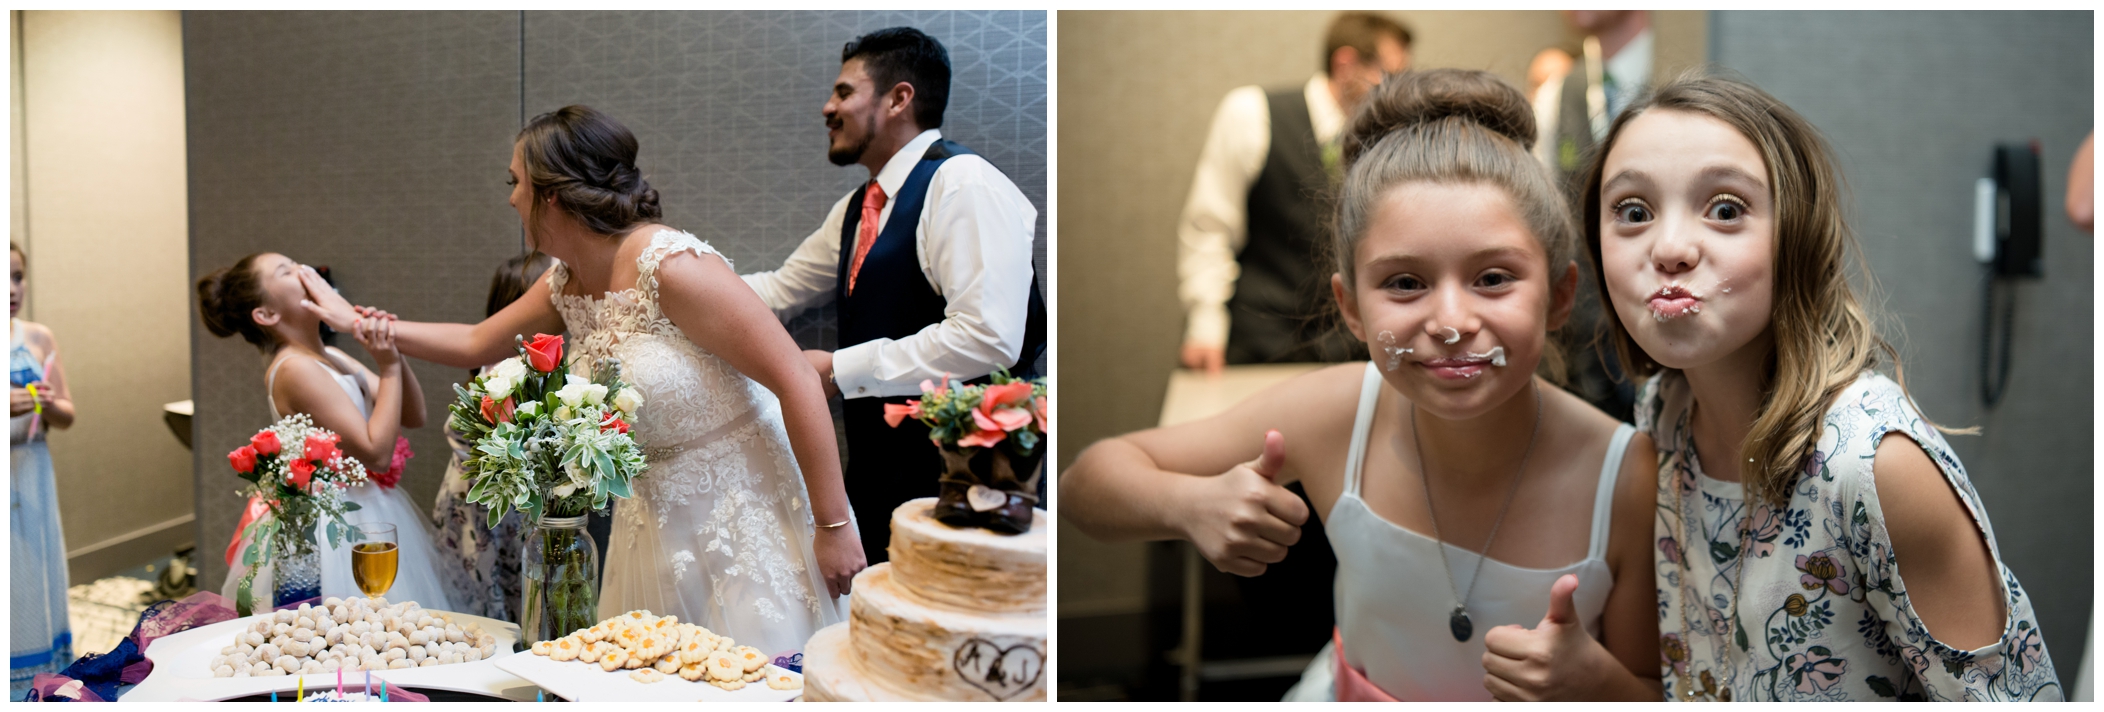 bride and groom smashing cake into flower girl's face